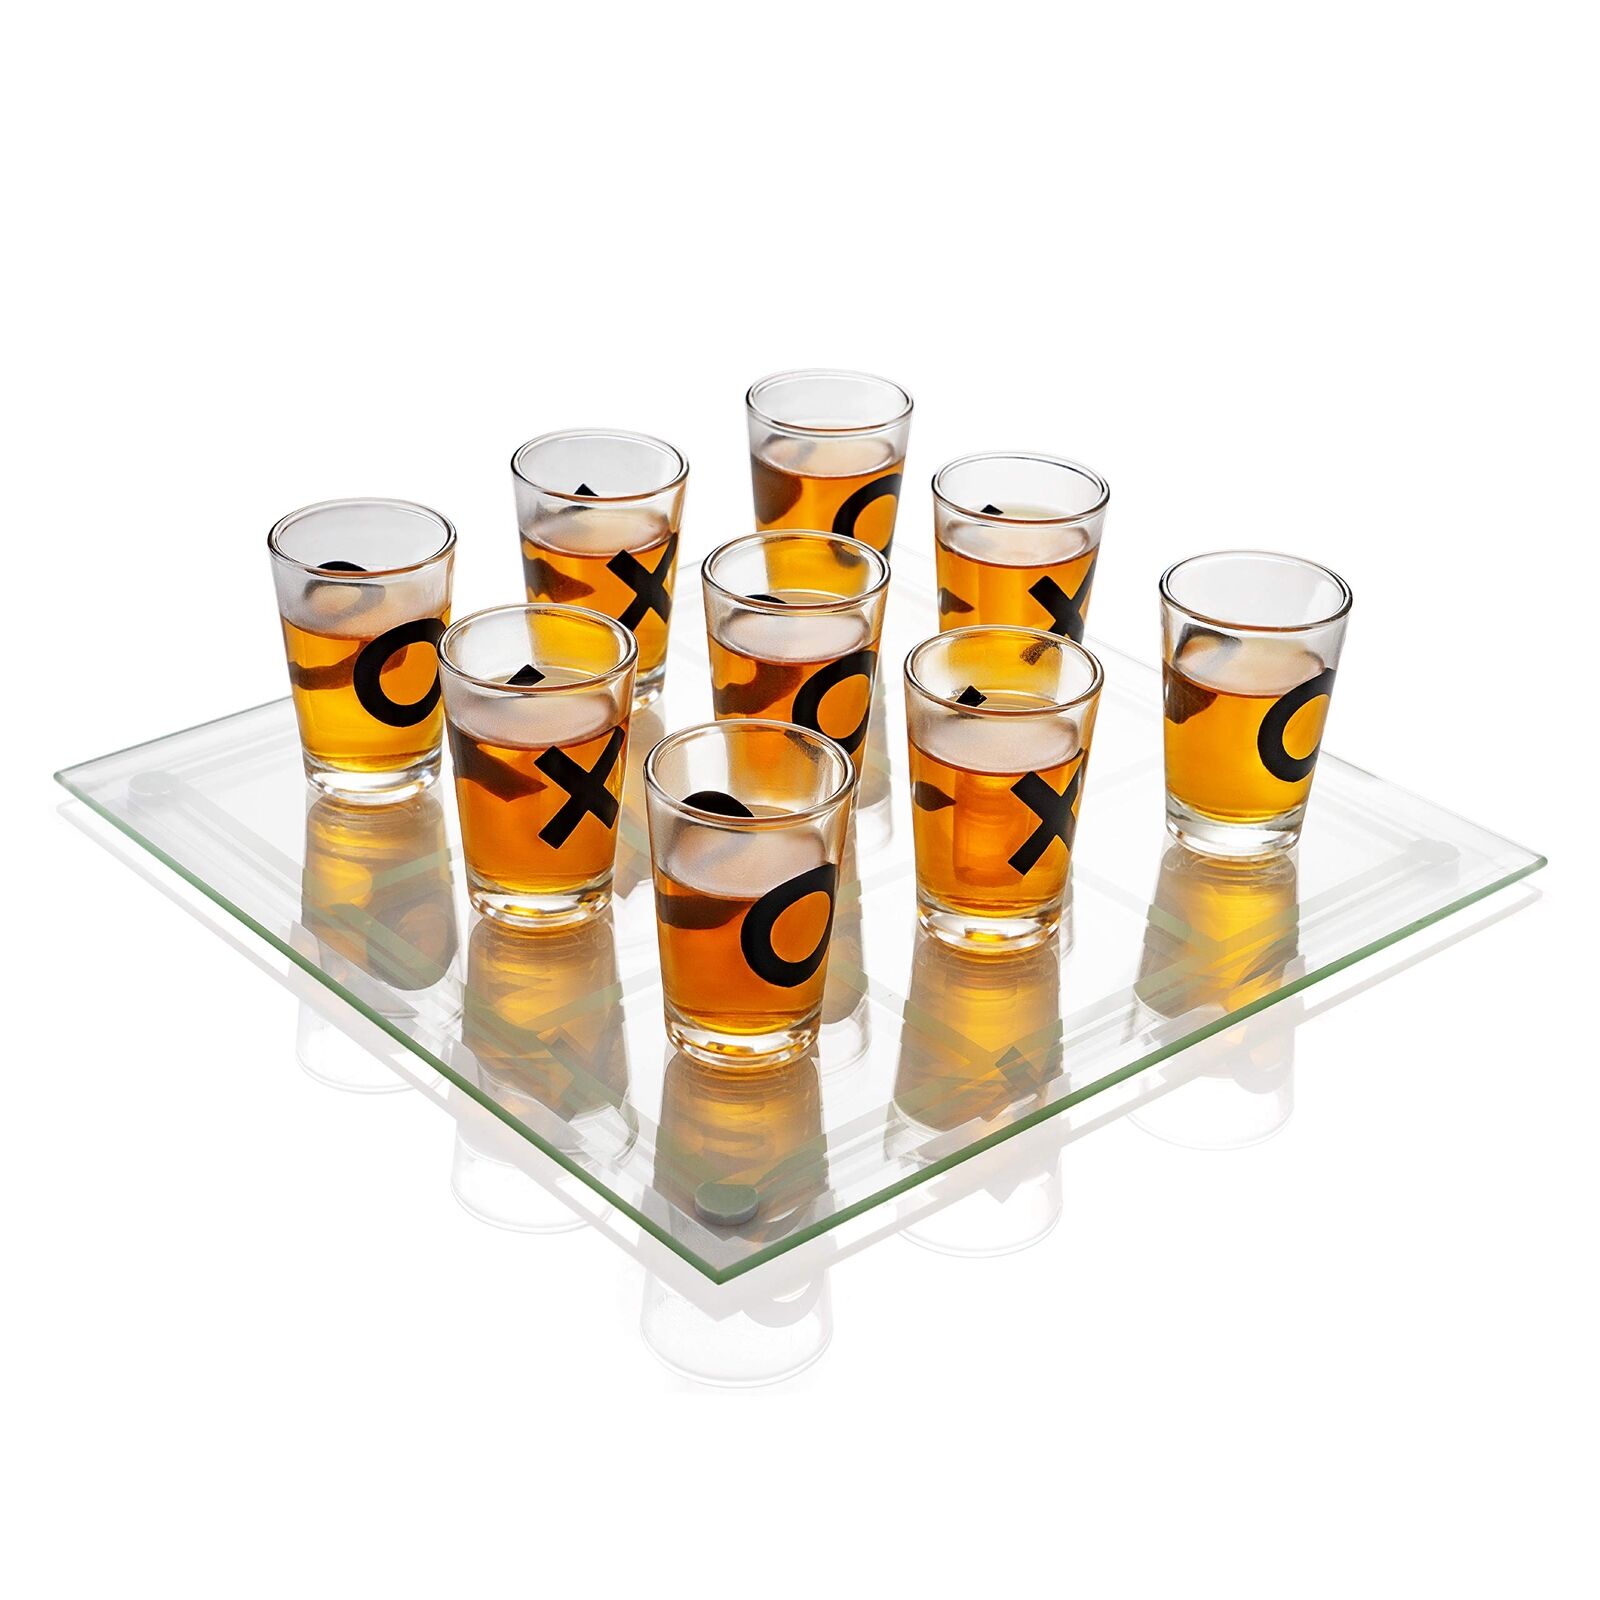 Shot Glass Tic Tac Toe Set - 9 Alcohol Shooters with X and O Marks, Clear Gla...